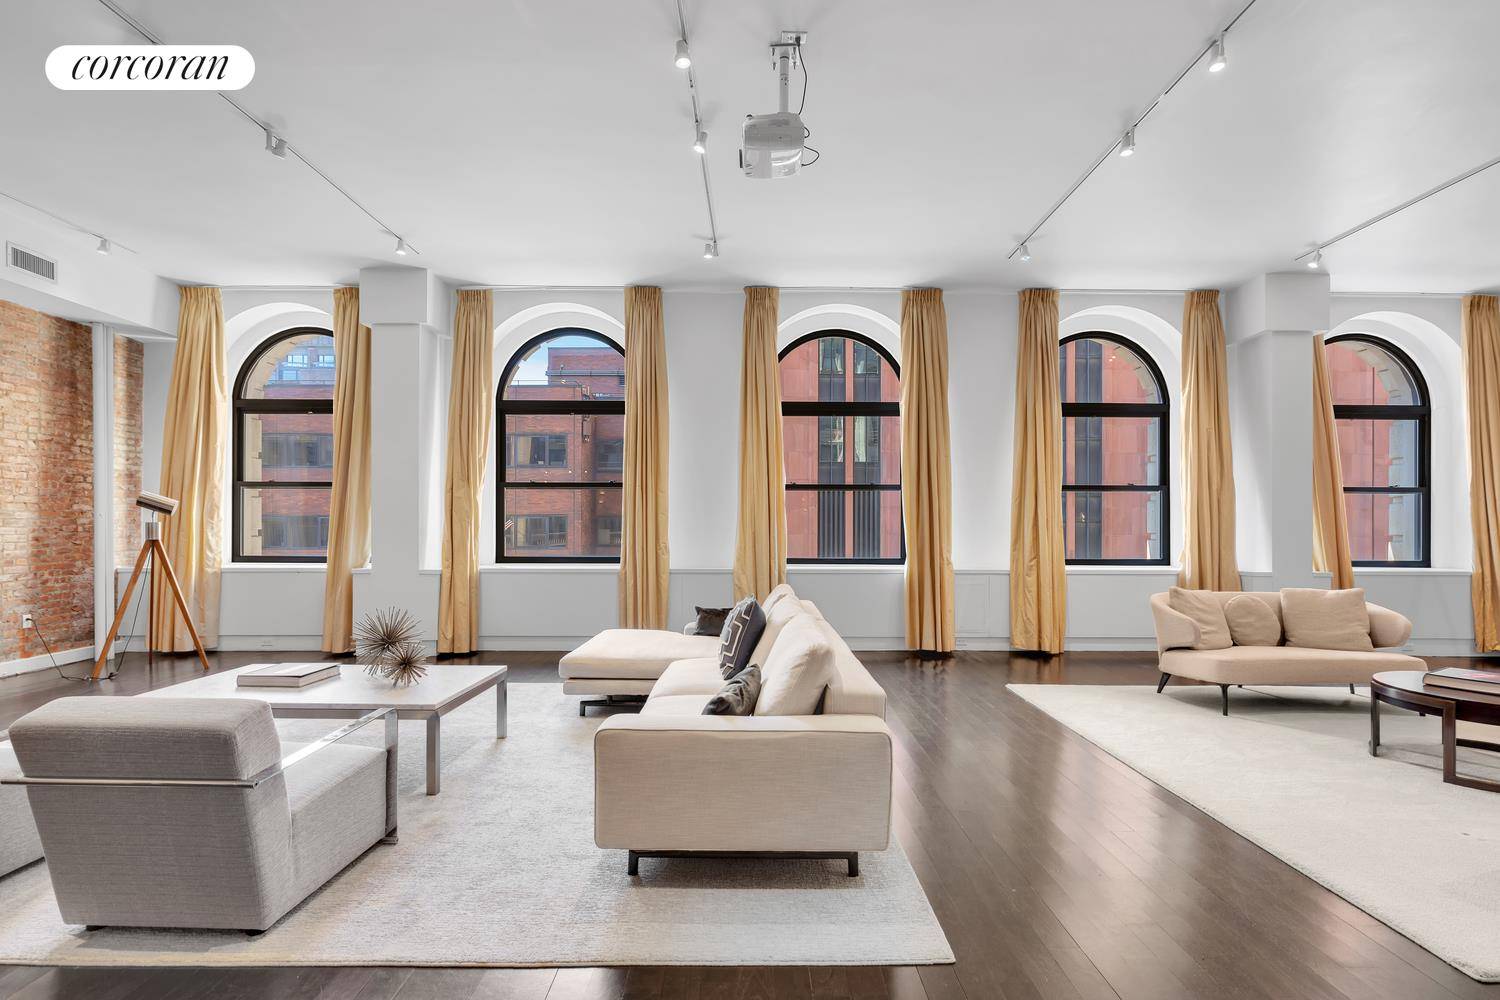 Perfectly located at the crossroads of Greenwich Village and NoHo, spanning 4, 804 square feet, this 3 bedroom convertible 4, 3.